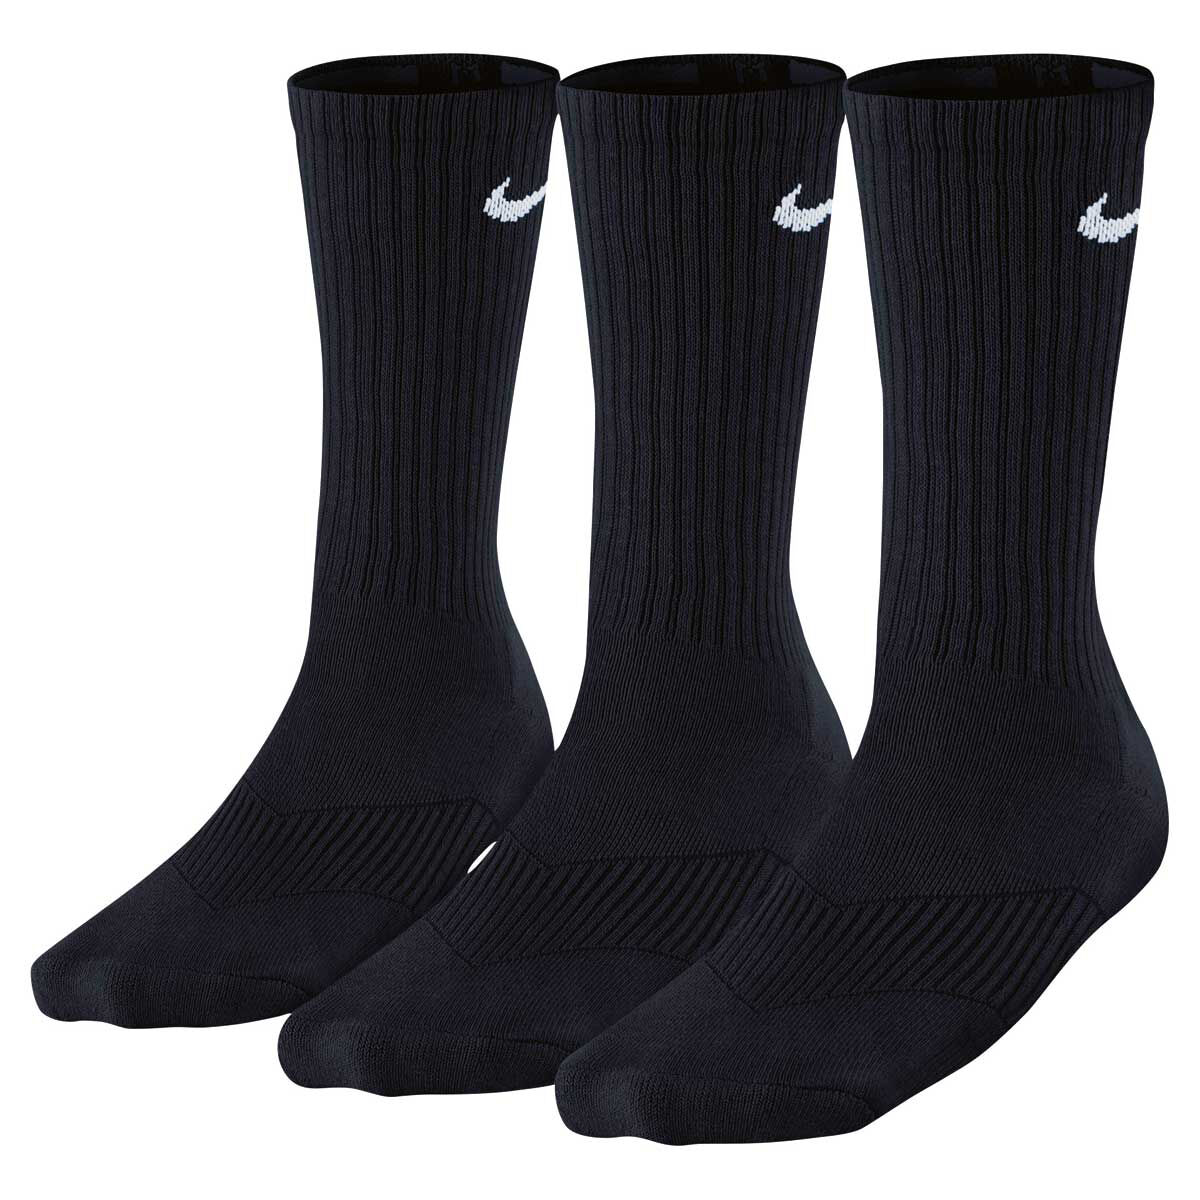 Nike Cotton Cushion 3 Pack Youth Crew 